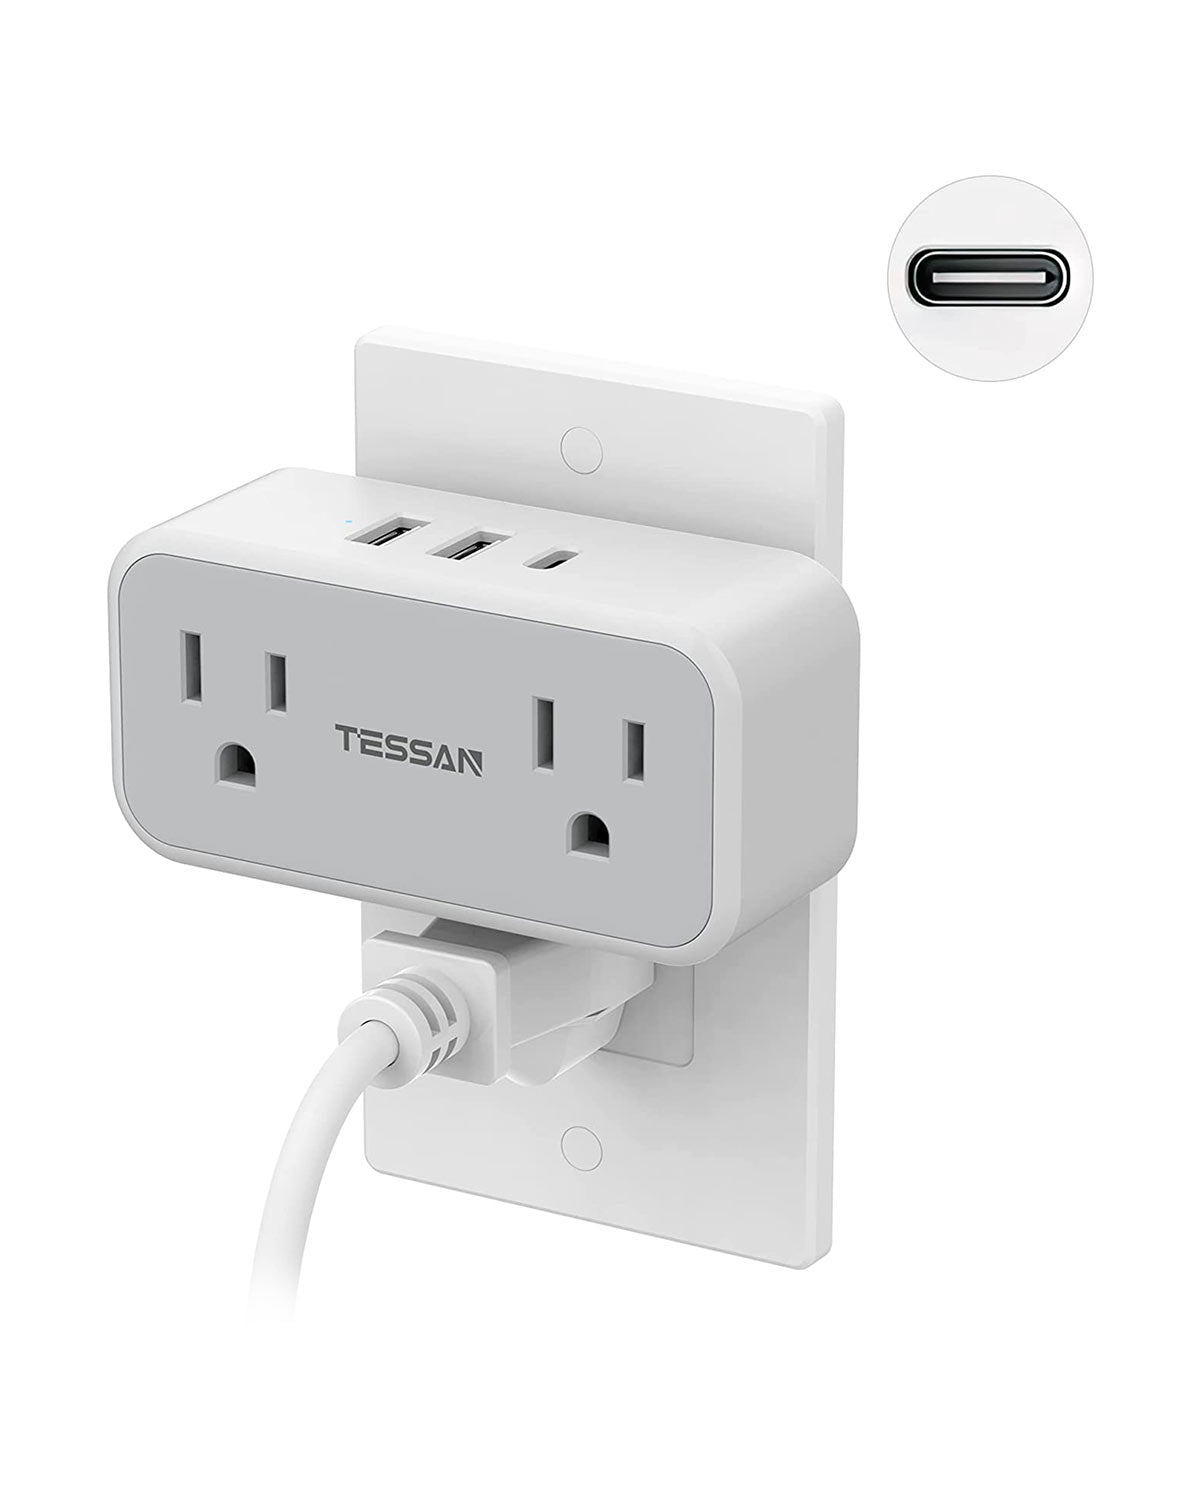 TESSAN Outlet Extender with USB Wall Charger, 3 USB Wall Plug (1 USB C Port)